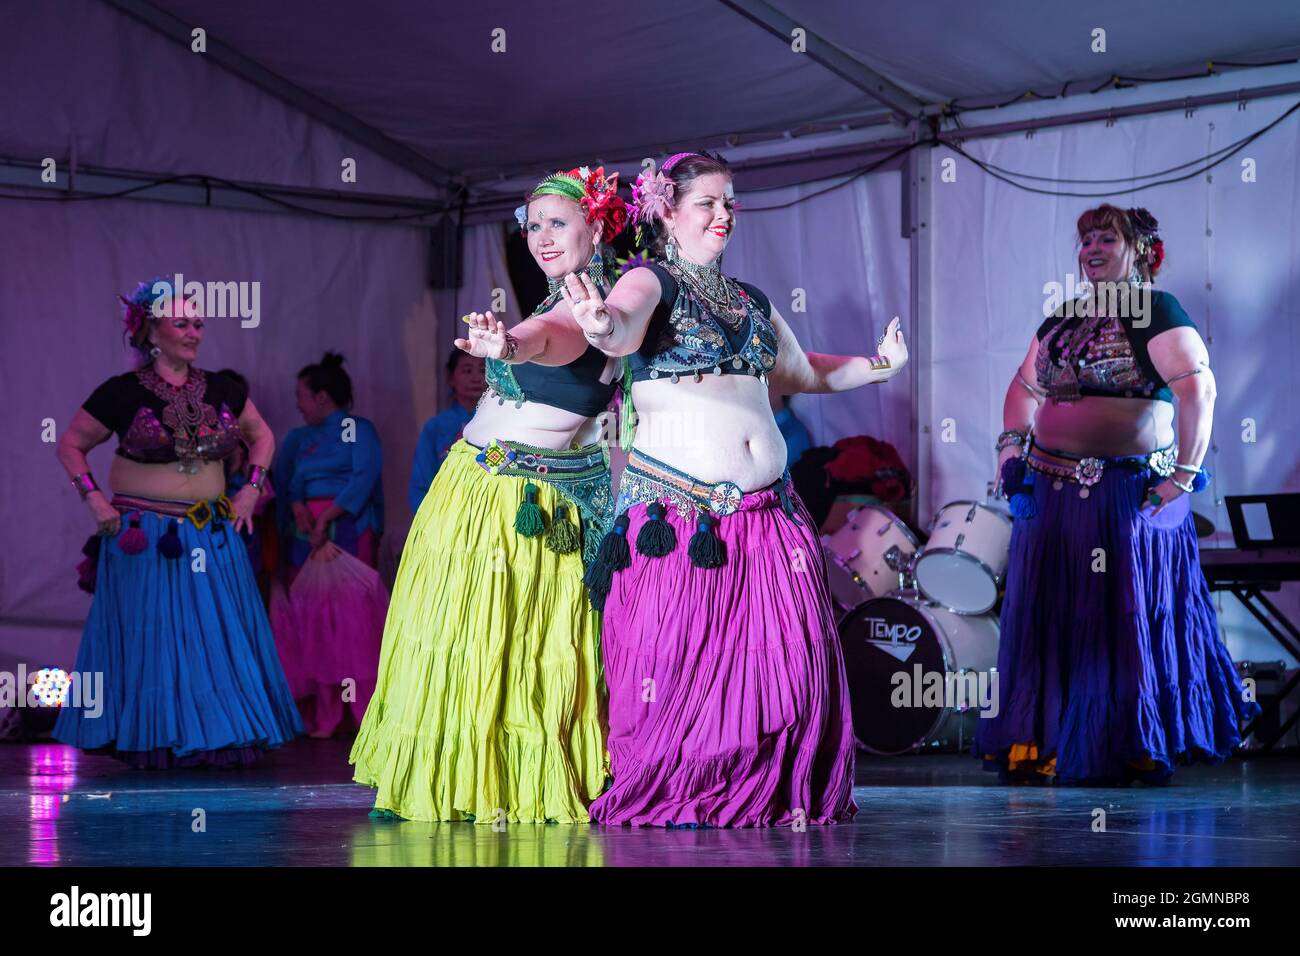 Tribal belly dancers in colorful gypsy costumes performing on stage Stock Photo